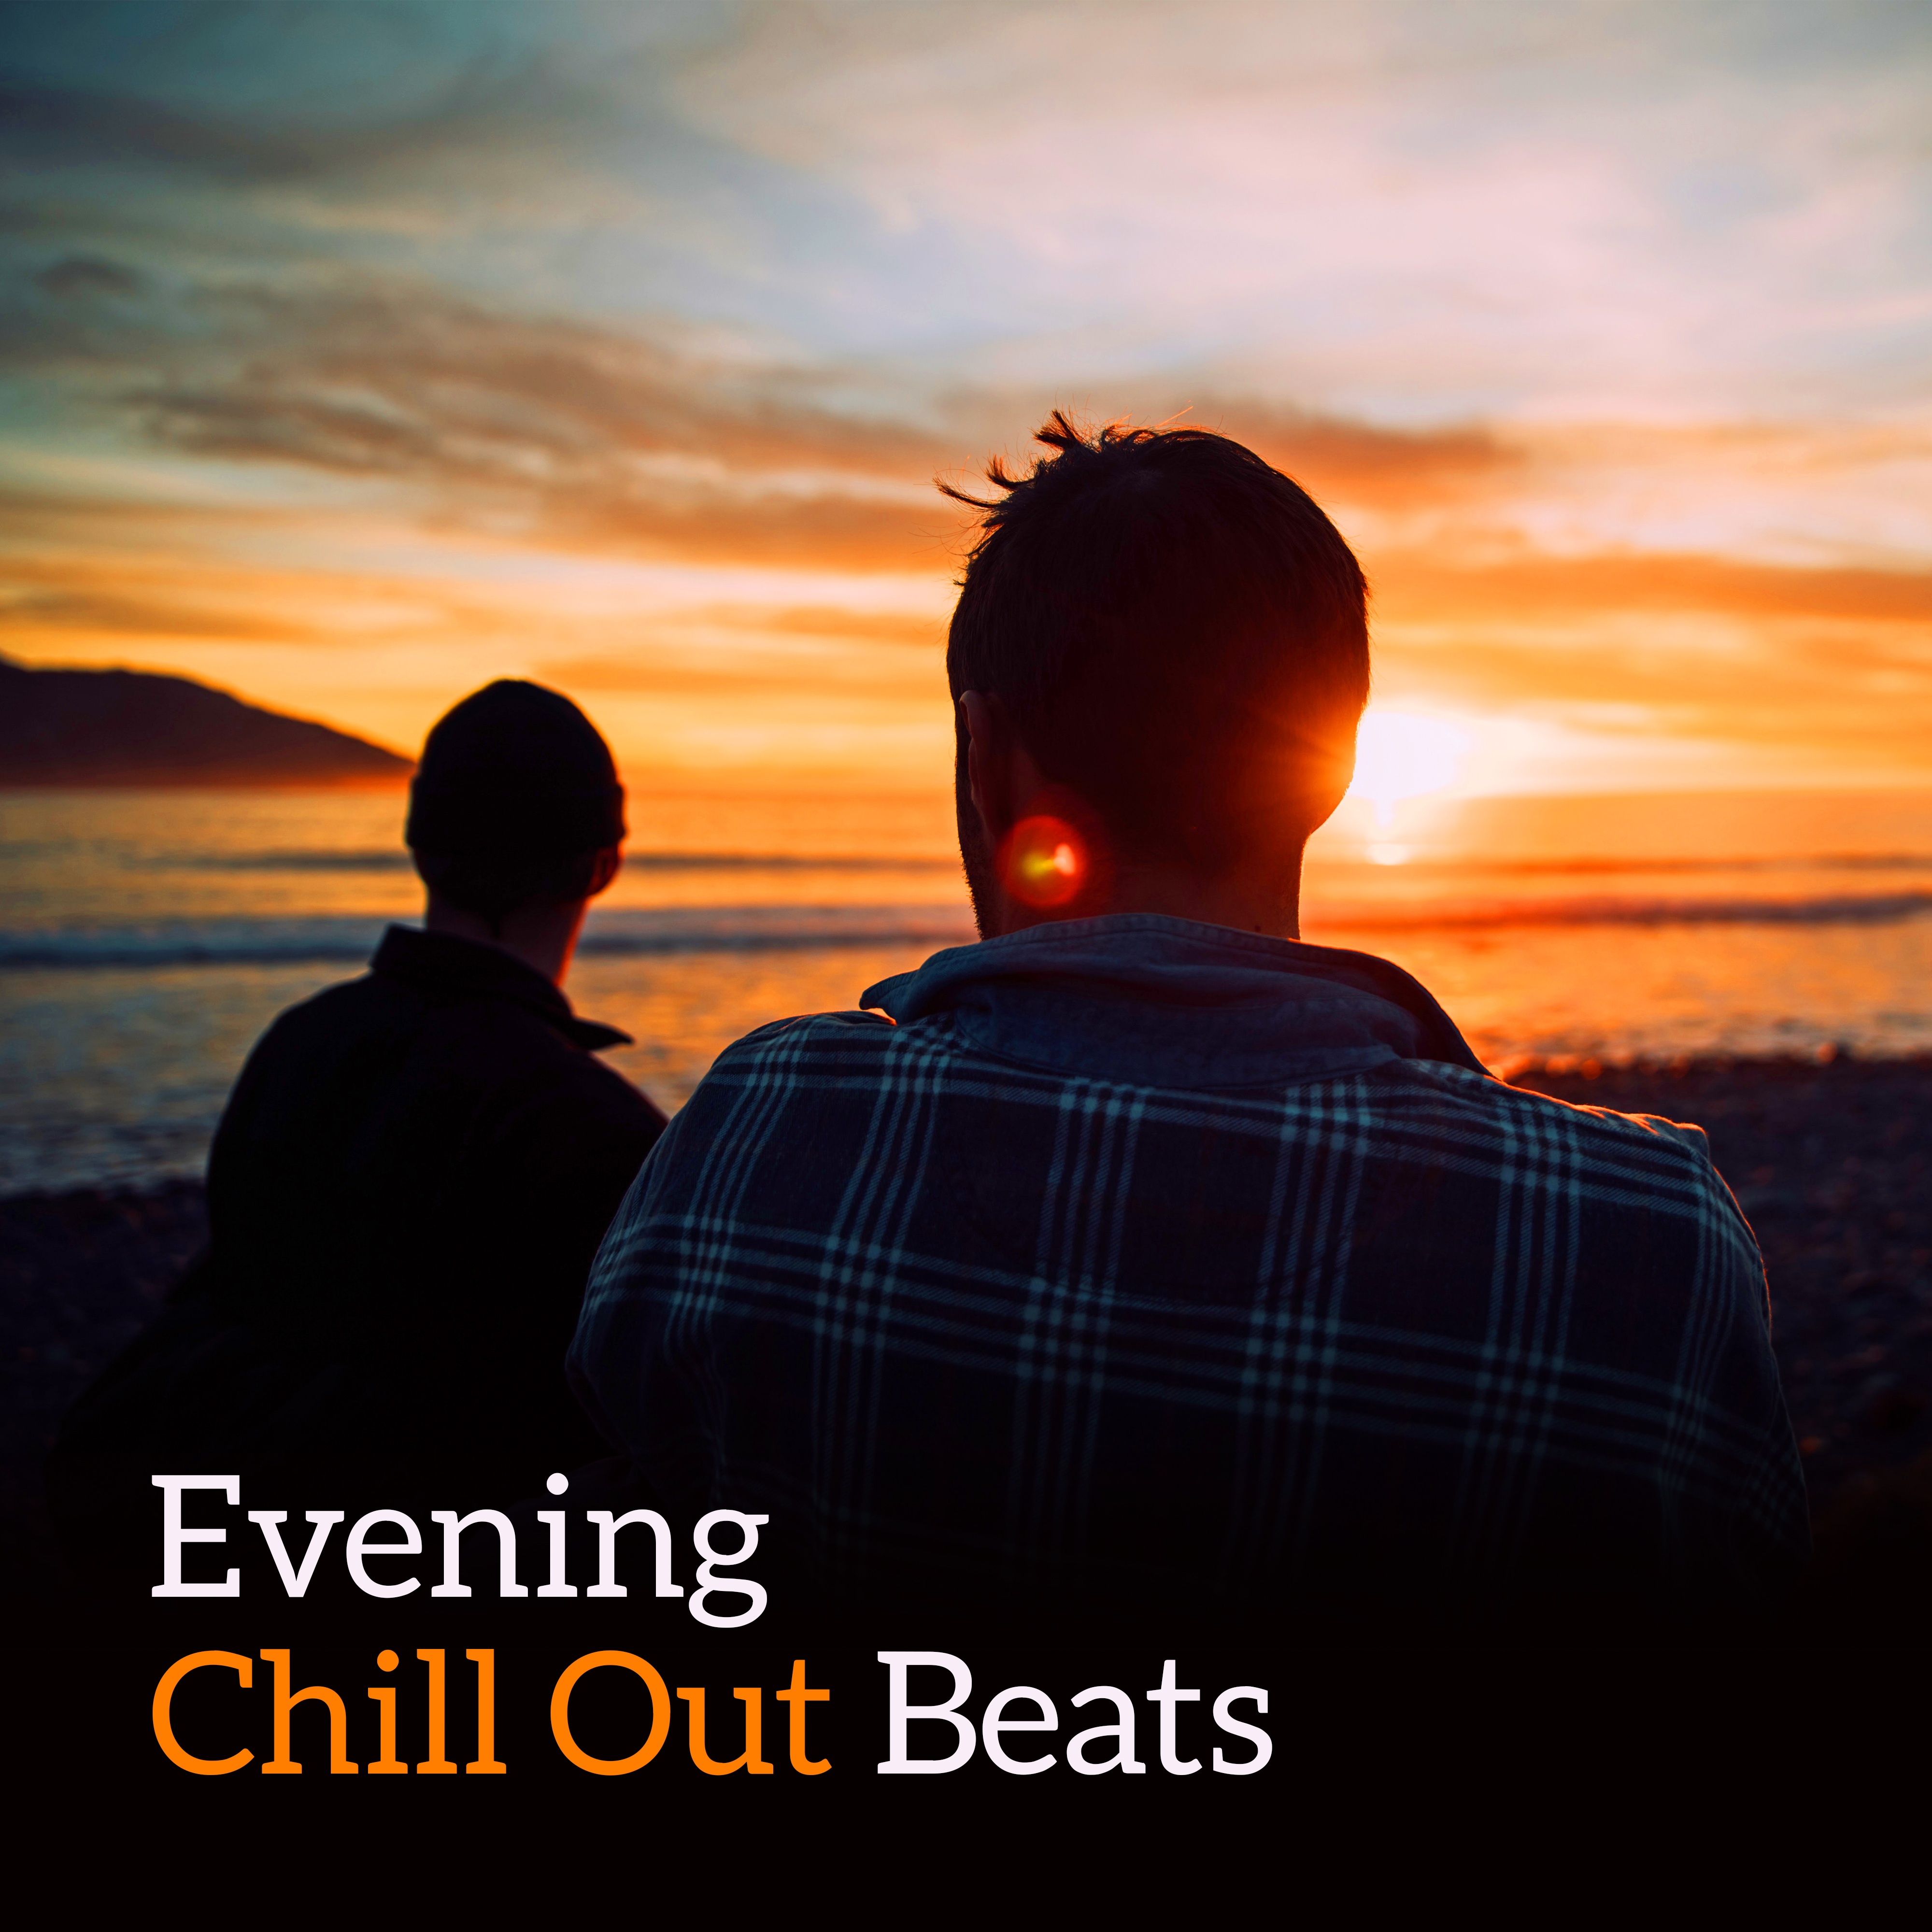 Evening Chill Out Beats  Summer Relaxation, Peaceful Waves, Calm Night, Chill Out Dreaming, Holiday 2017